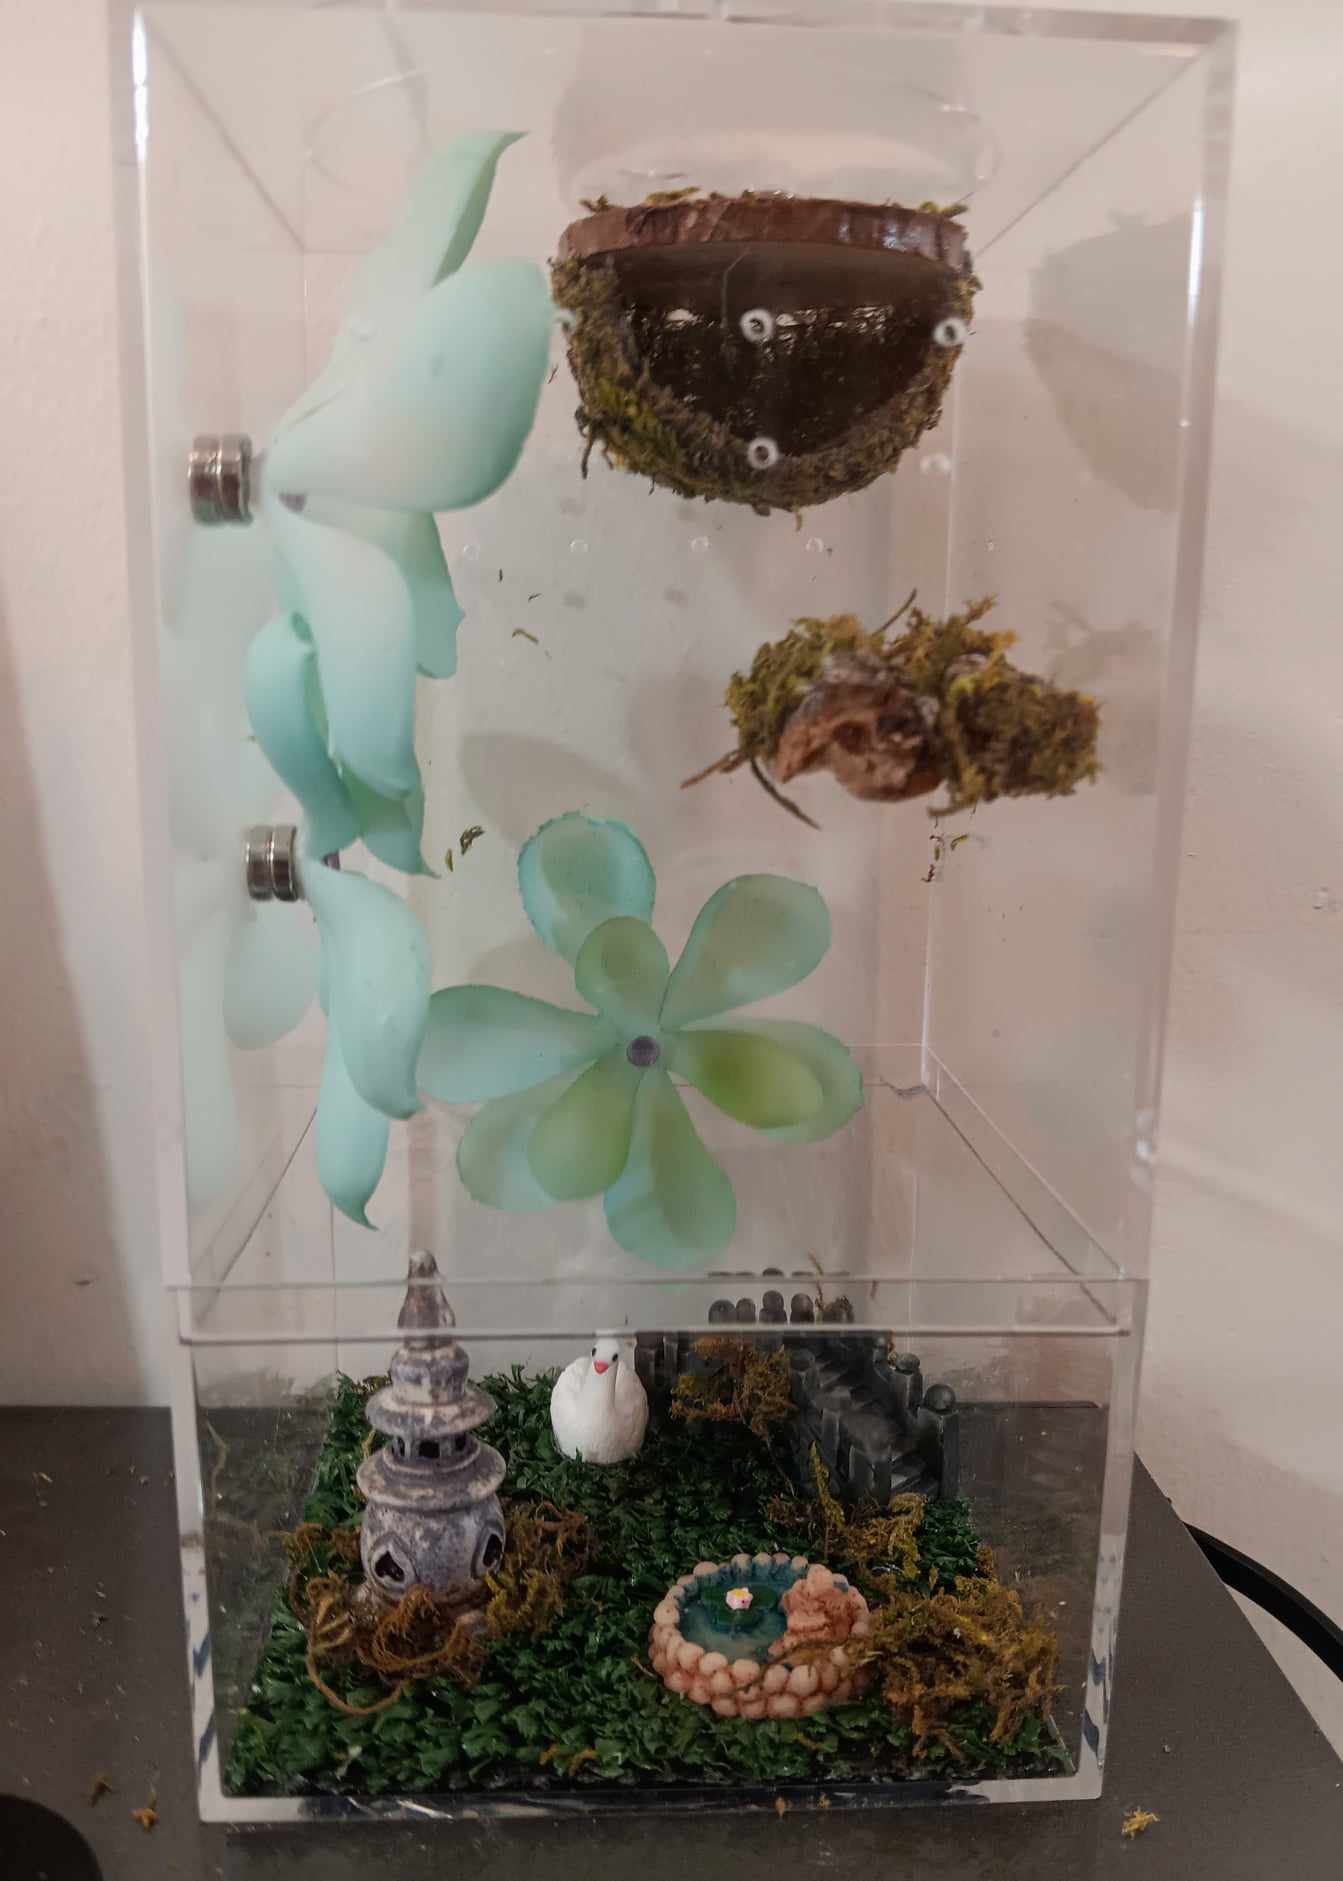 Jumping spider enclosure with decorations